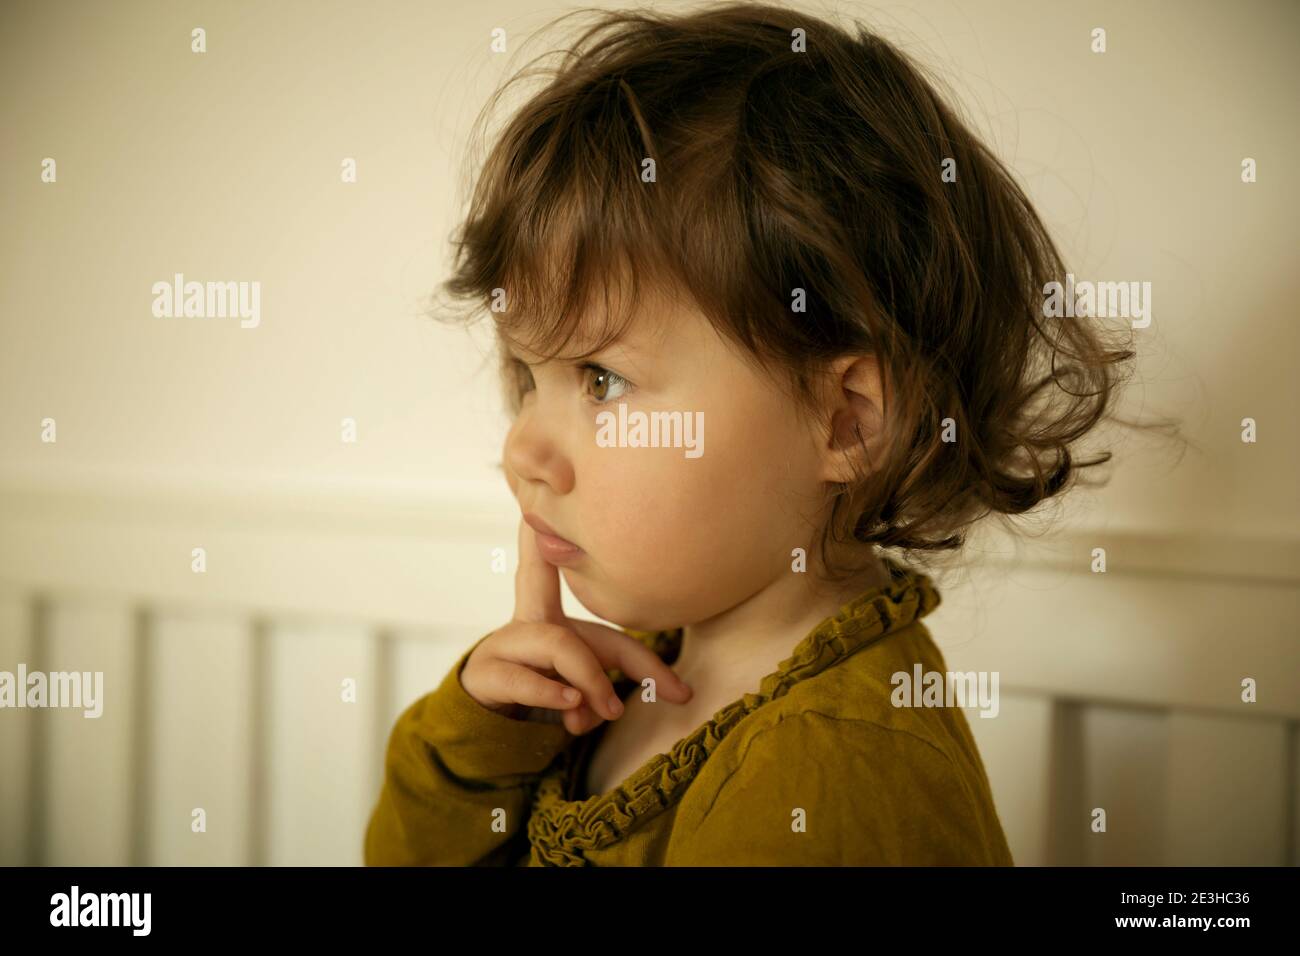 Portrait of a thoughtful baby girl Stock Photo